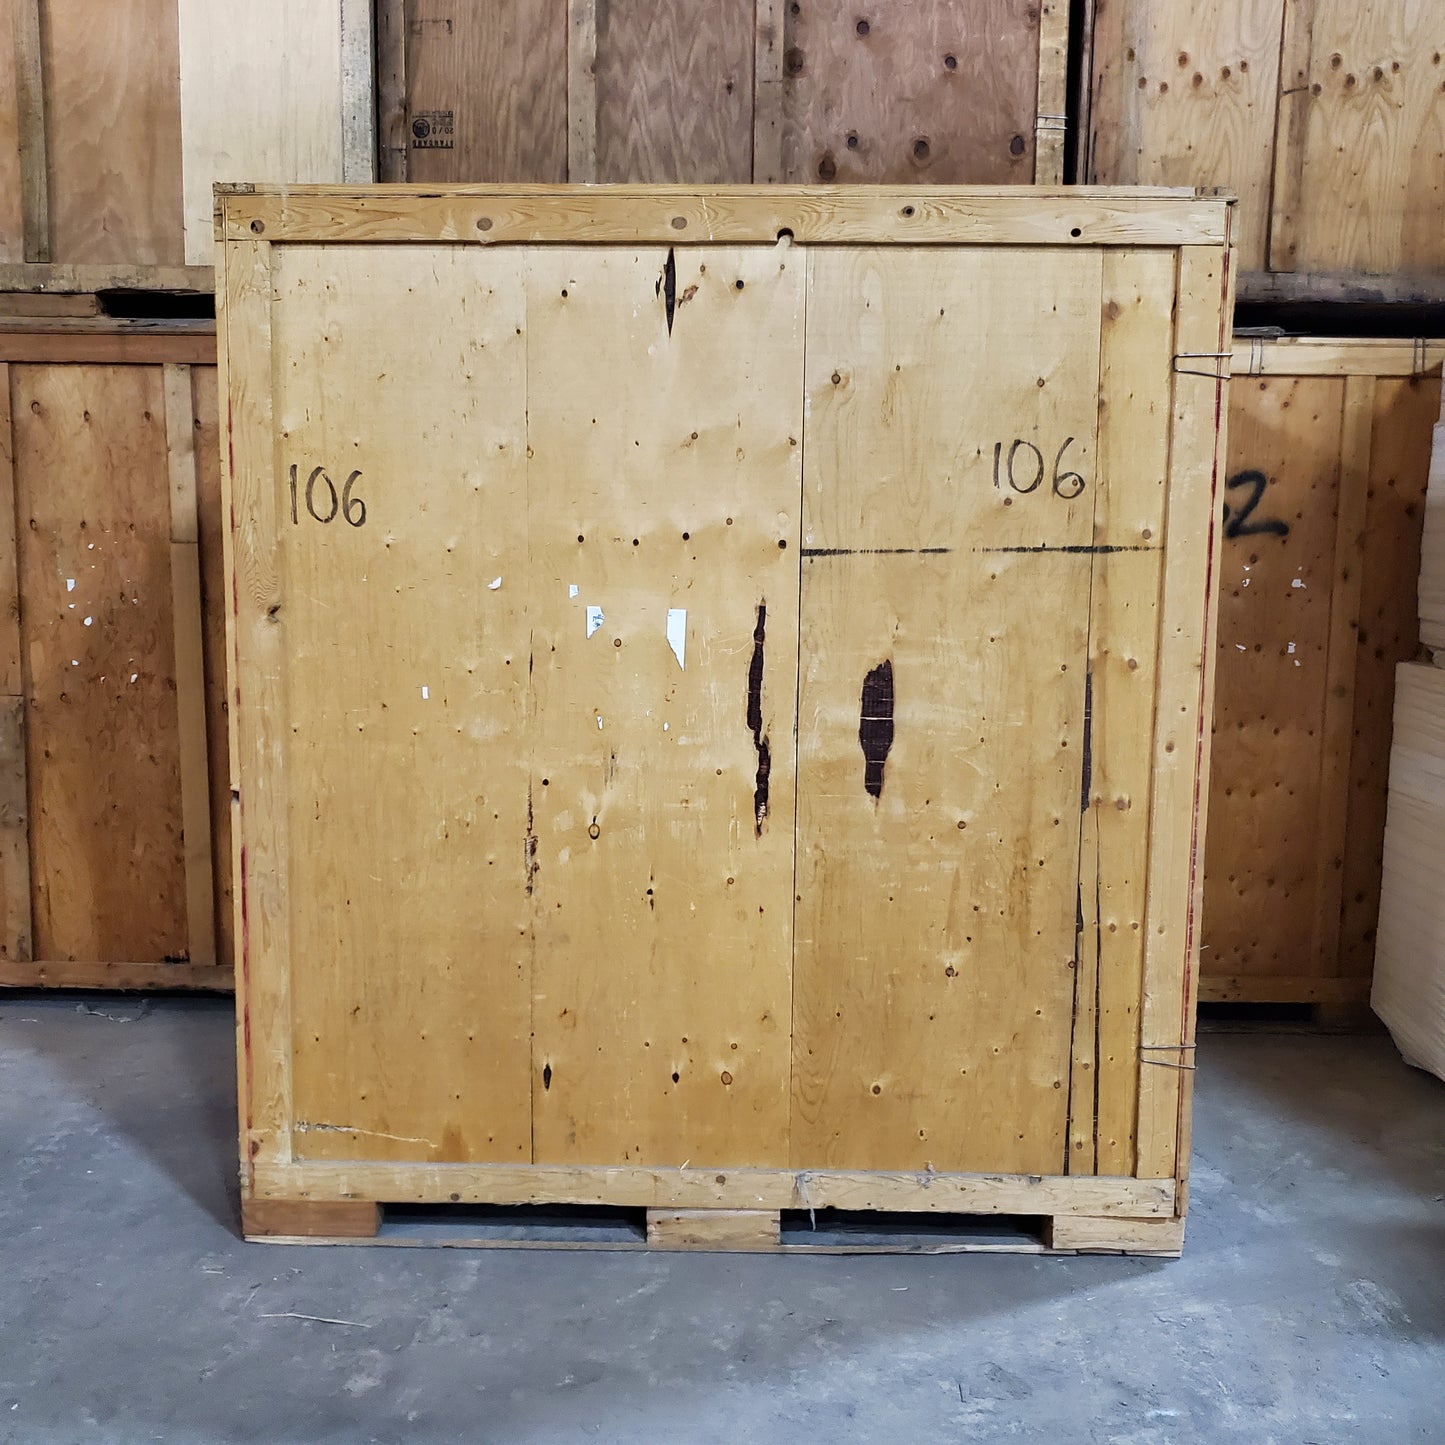 Z@ LARGE PLYWOOD STORAGE CONTAINER / CRATE ~5' W x 7' L x 7.5' T (Good Condition, AS-IS)